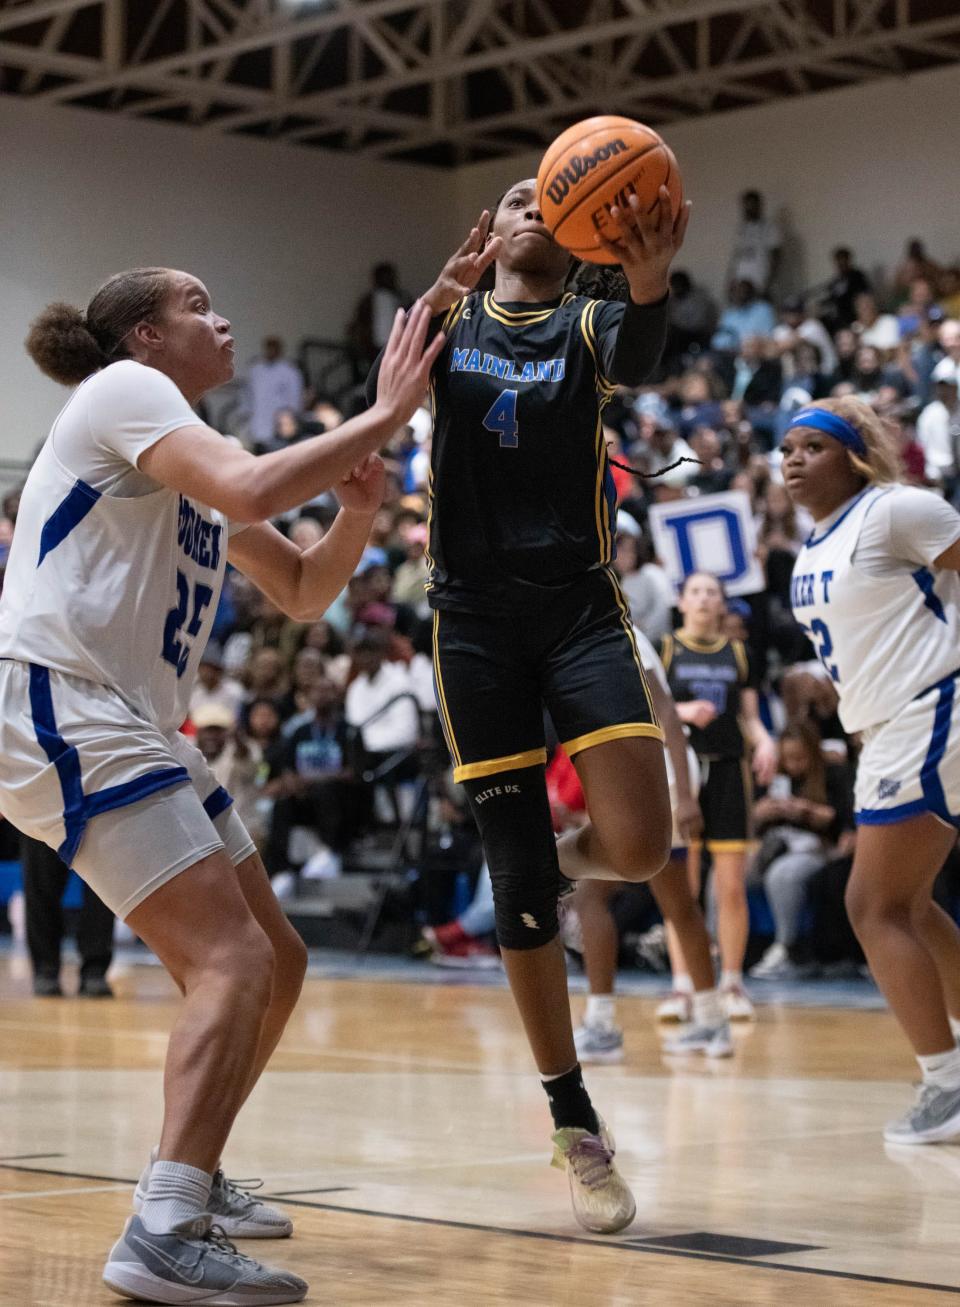 Anovia Sheals (4) takes it to the hoop during the Mainland vs Washington girls 5A Regional Finals basketball game at Booker T. Washington High School in Pensacola on Thursday, Feb. 22, 2024.